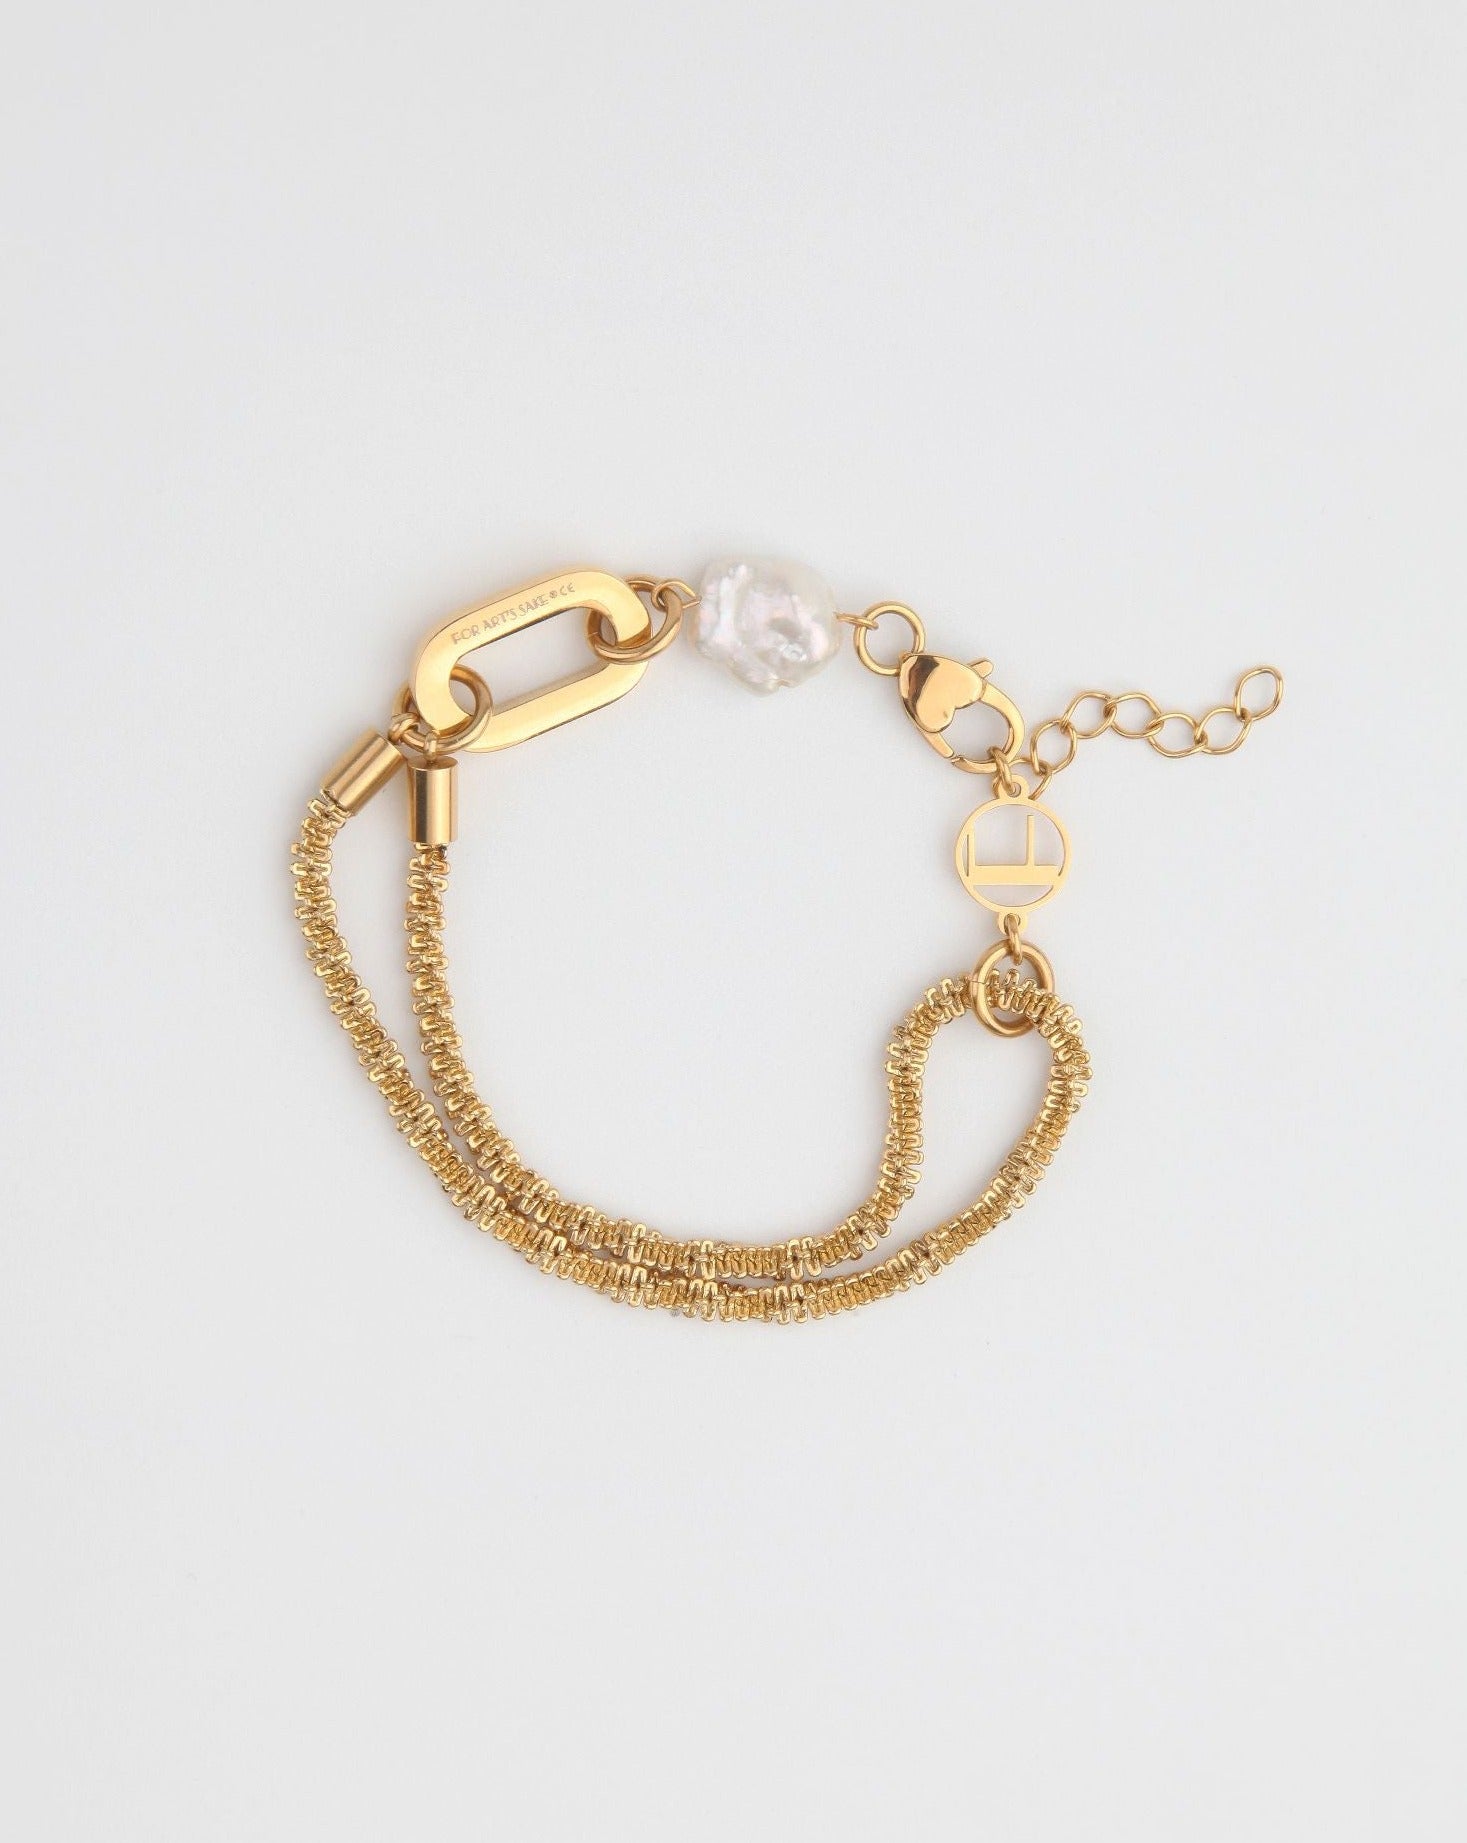 A delicate gold Raindrop Bracelet Gold by For Art&#39;s Sake® featuring an 18kt gold plating double chain design, a lobster clasp, and adjustable length with small circular links. It is adorned with a single irregular freshwater pearl and a unique rectangular link for added style. The bracelet is displayed on a light background.